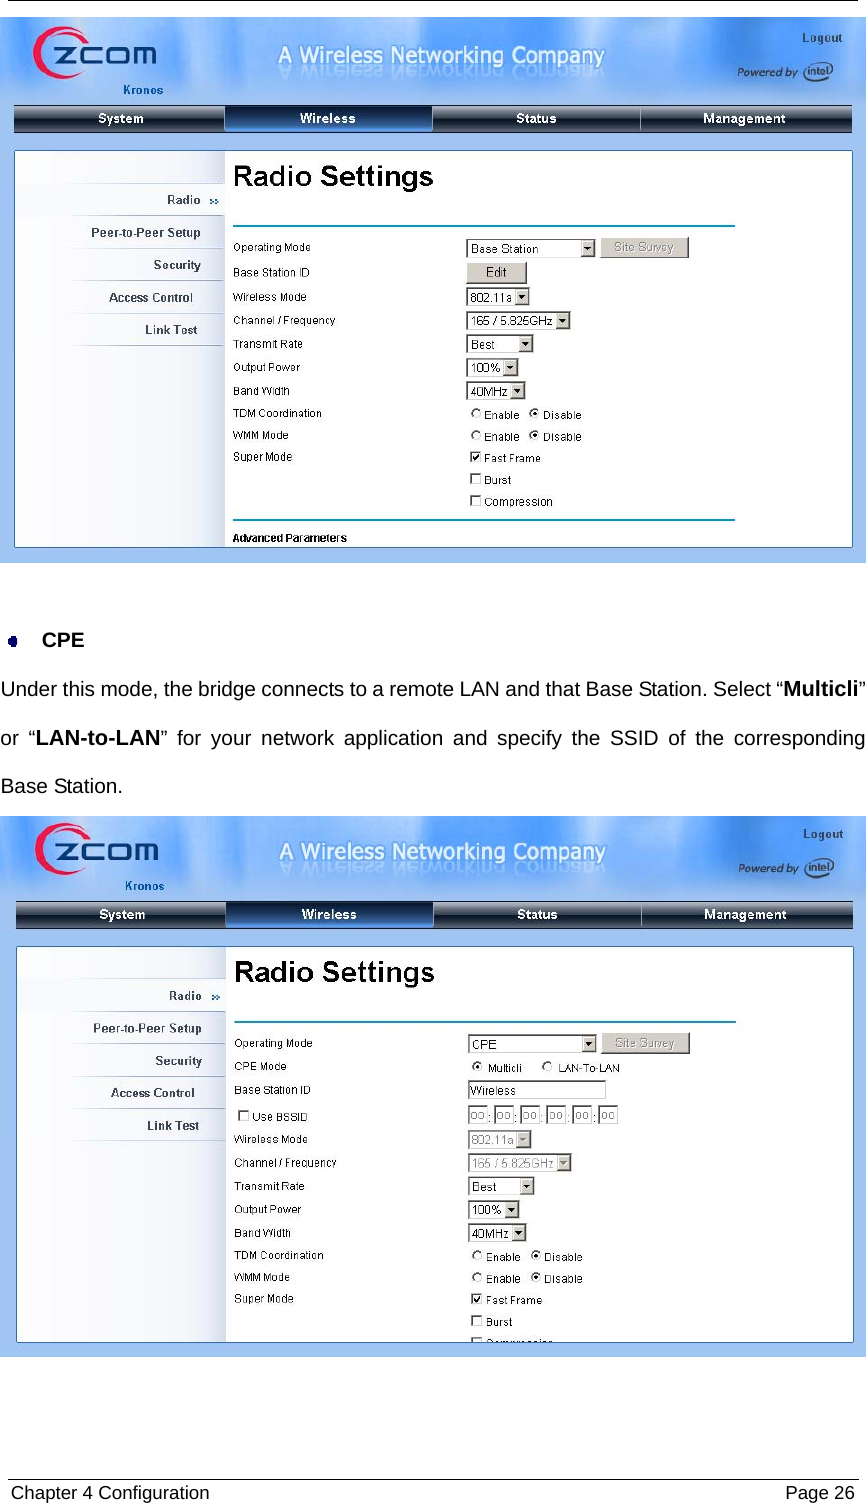  Chapter 4 Configuration  Page 26   CPE Under this mode, the bridge connects to a remote LAN and that Base Station. Select “Multicli” or “LAN-to-LAN” for your network application and specify the SSID of the corresponding Base Station.    